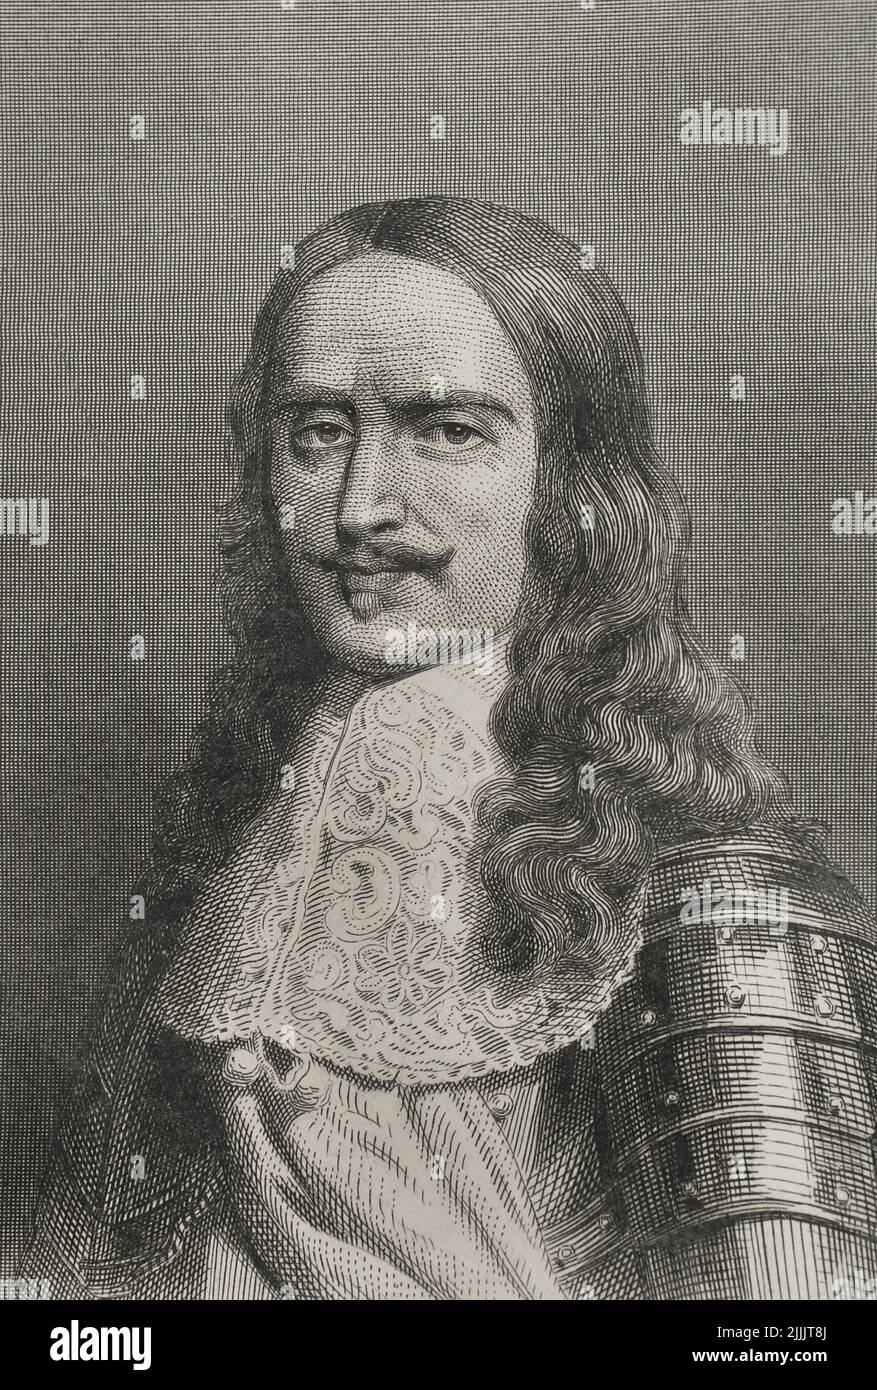 Henri de la Tour d'Auvergne-Bouillon (1611-1675). French nobleman and military. Appointed Marshal of France in 1643 and Marshal-General of the Camps and Armies of the King in 1660. Portrait. Engraving by Geoffroy. 'Historia Universal', by César Cantú. Volume VIII. 1858. Stock Photo